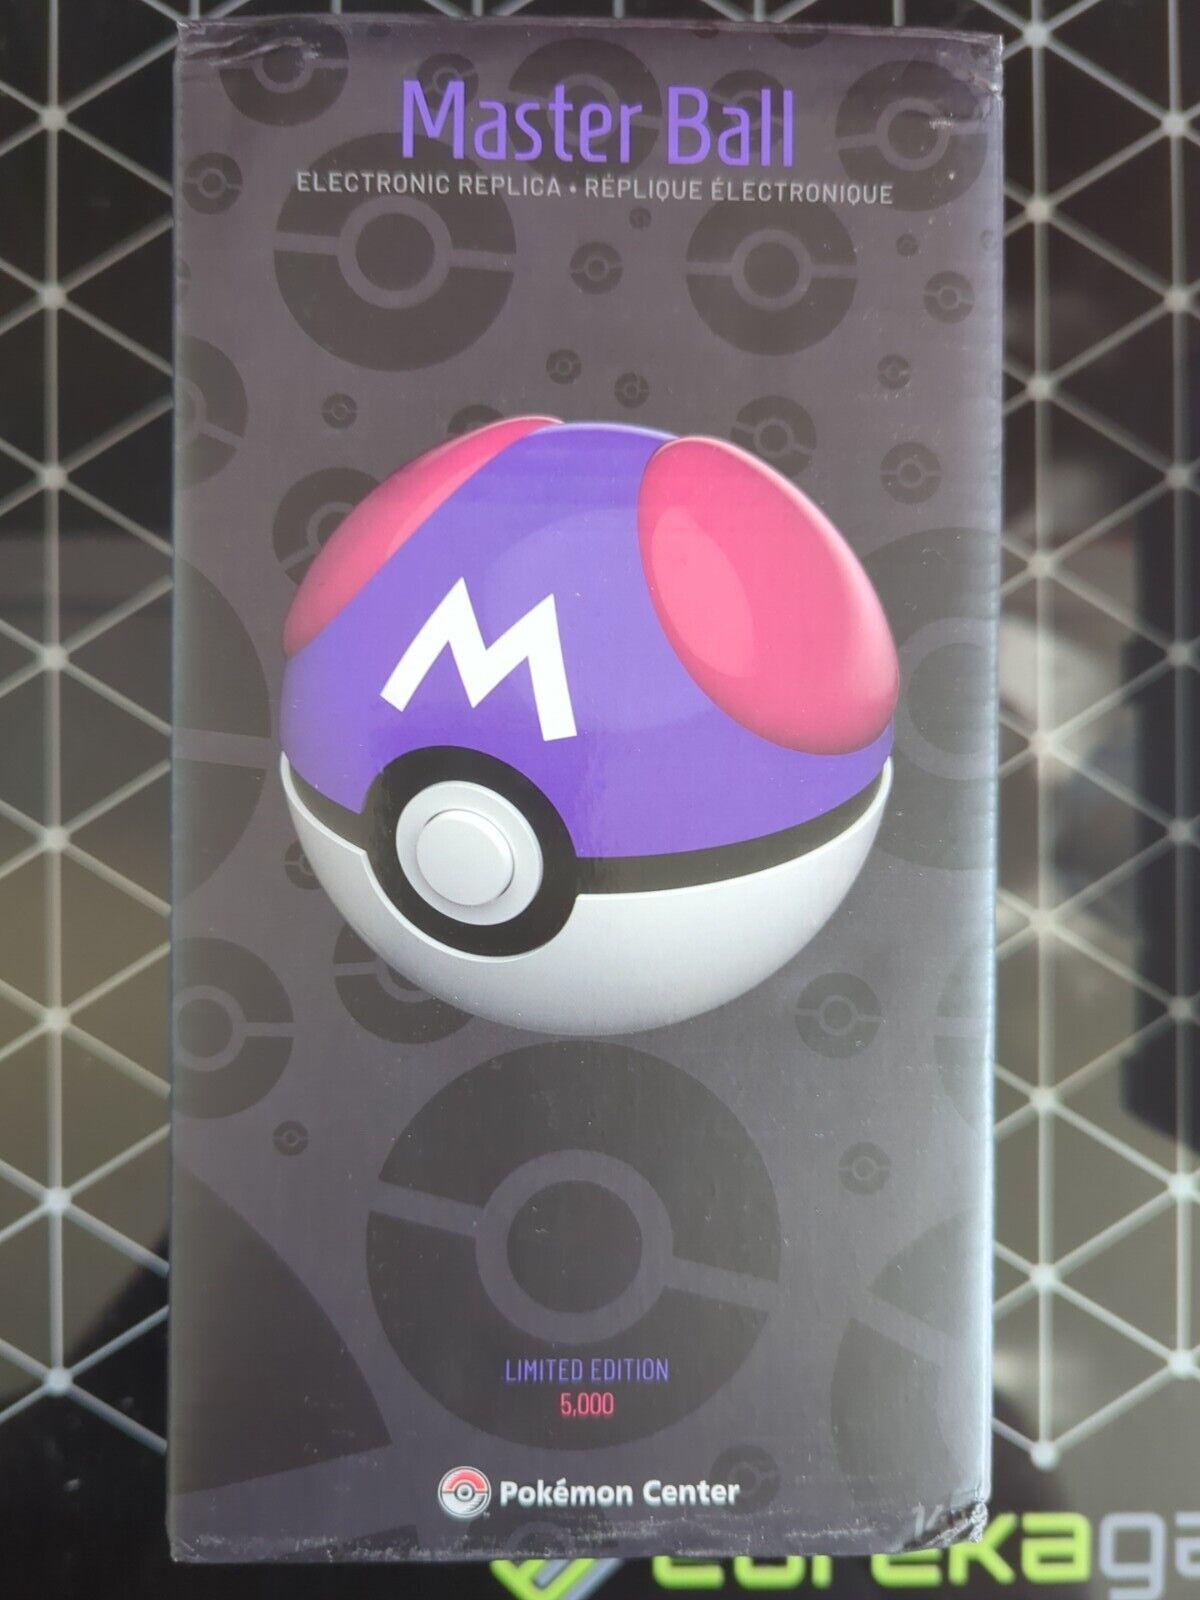 Pokémon Master Ball #893/5000 by The Wand Company, Limited Edition - Open Box